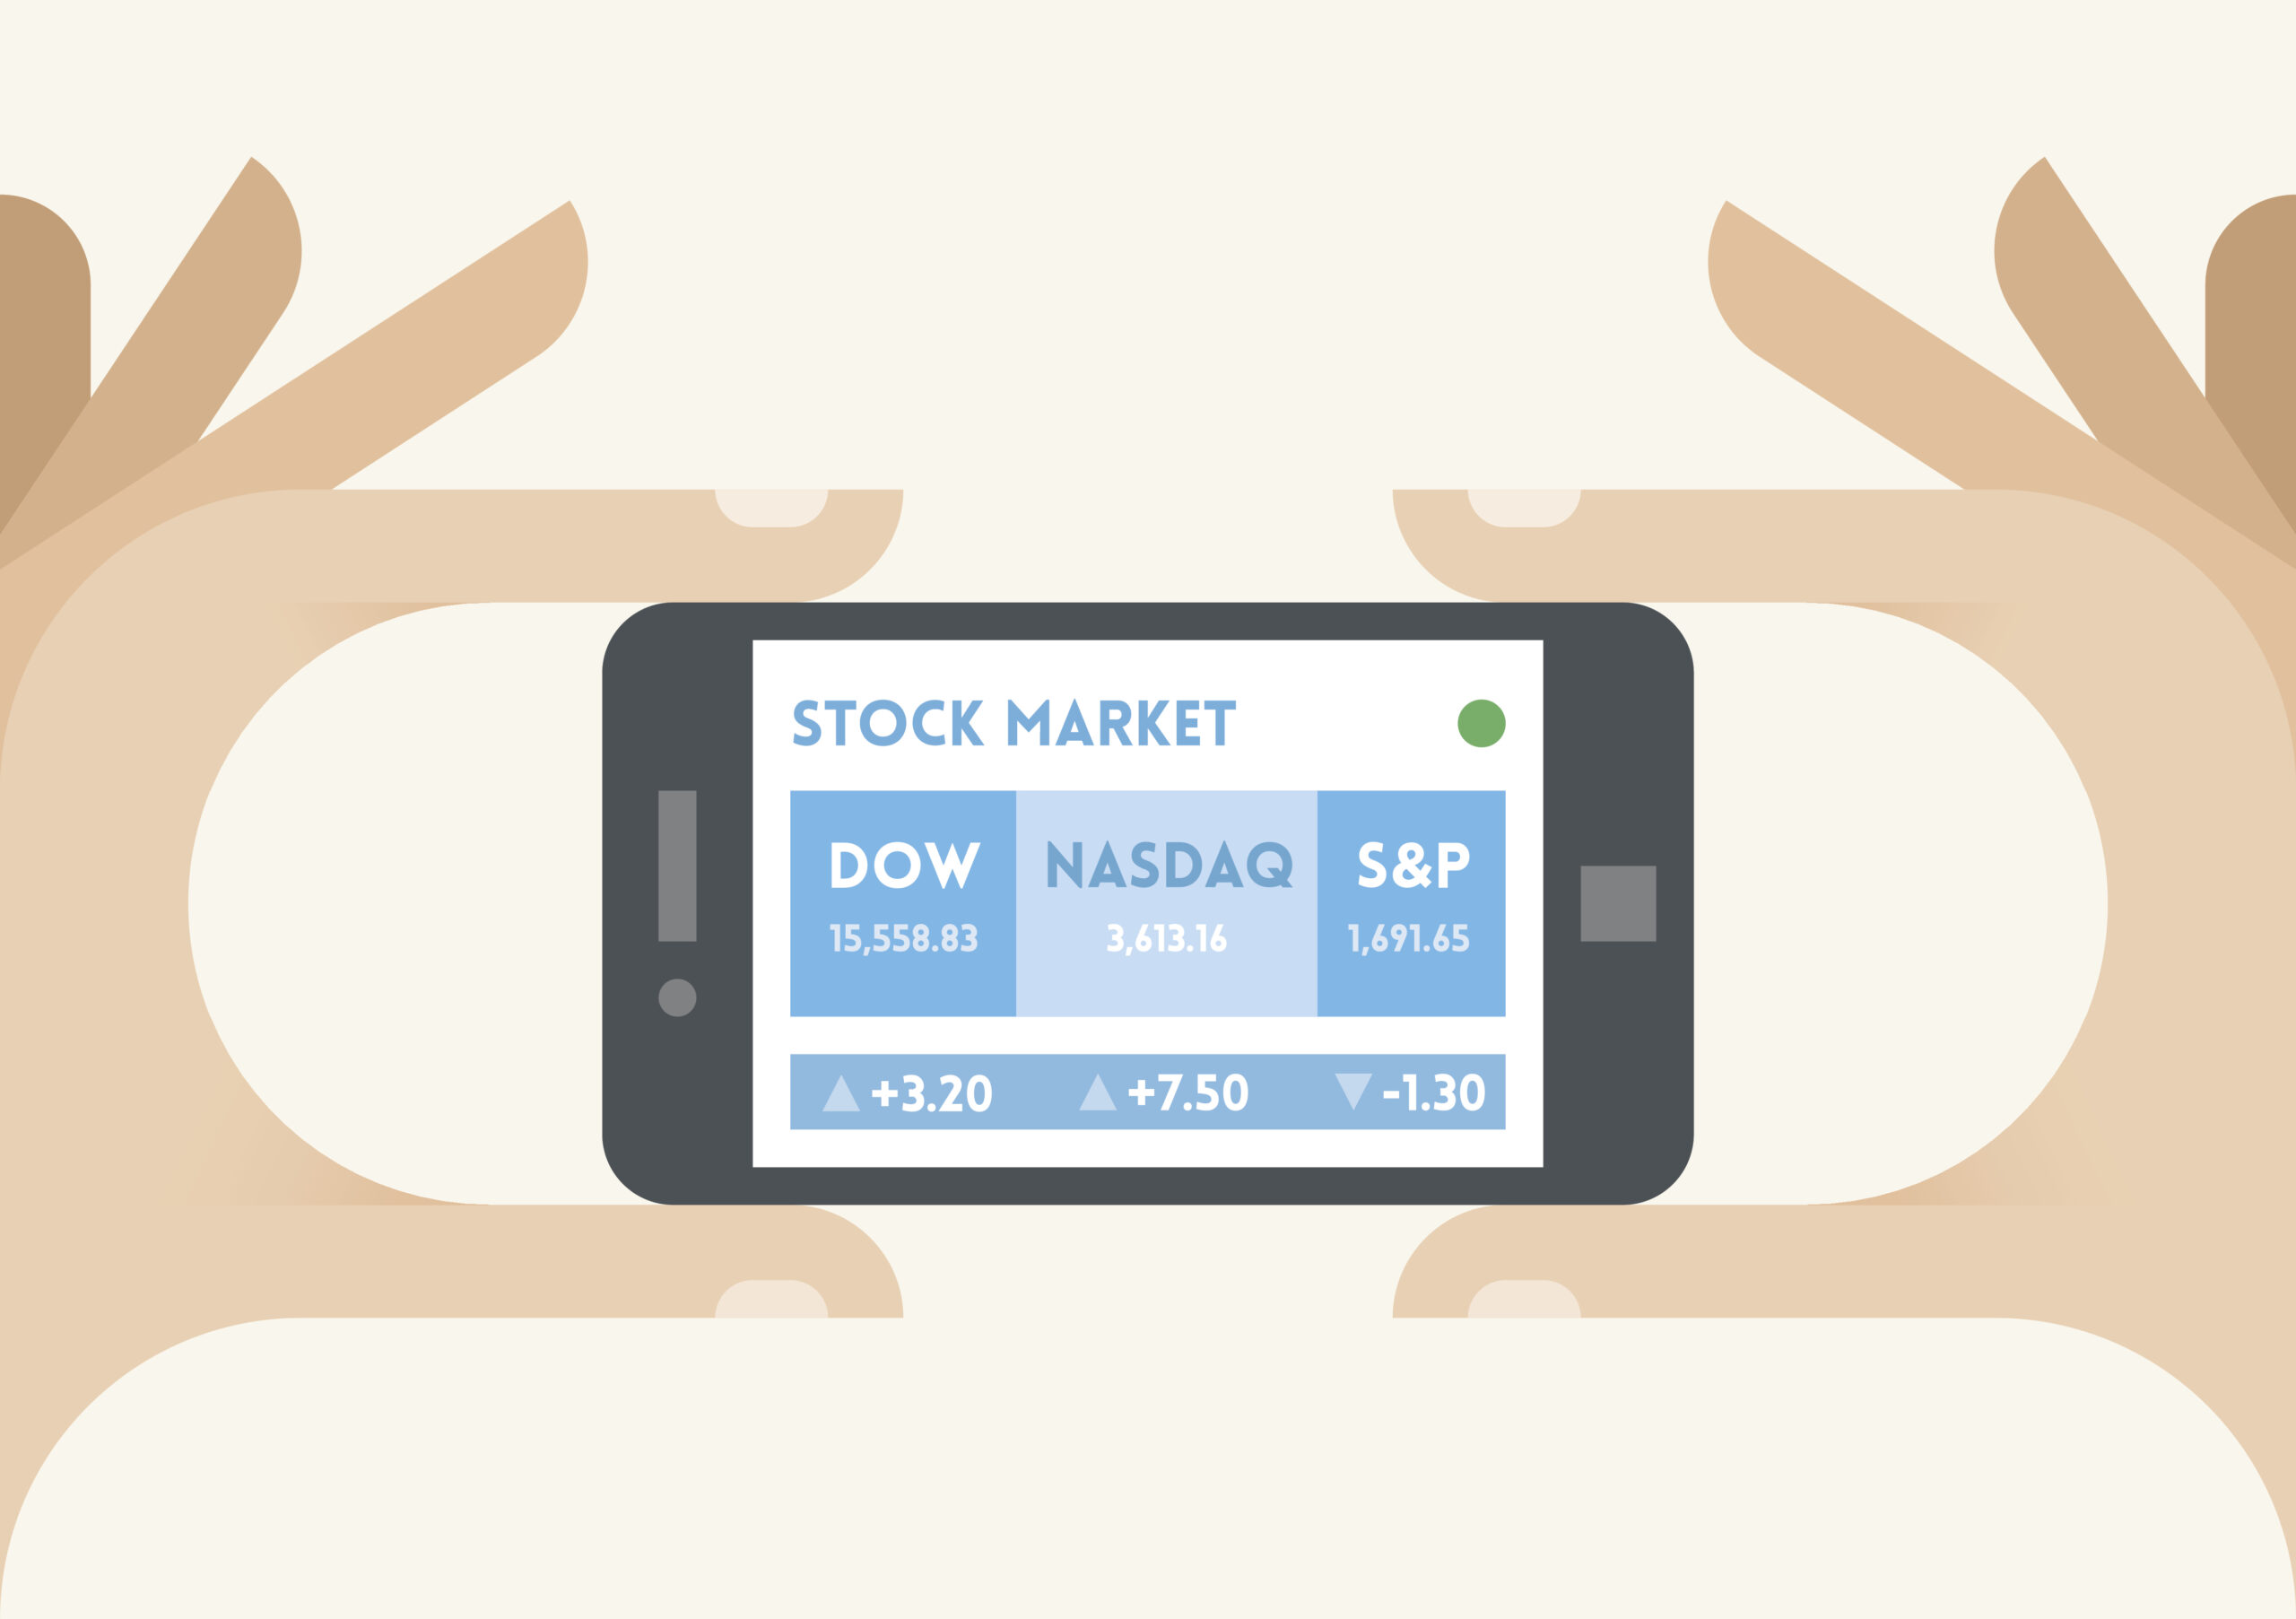 United States stock market indices ticker on the mobile phone